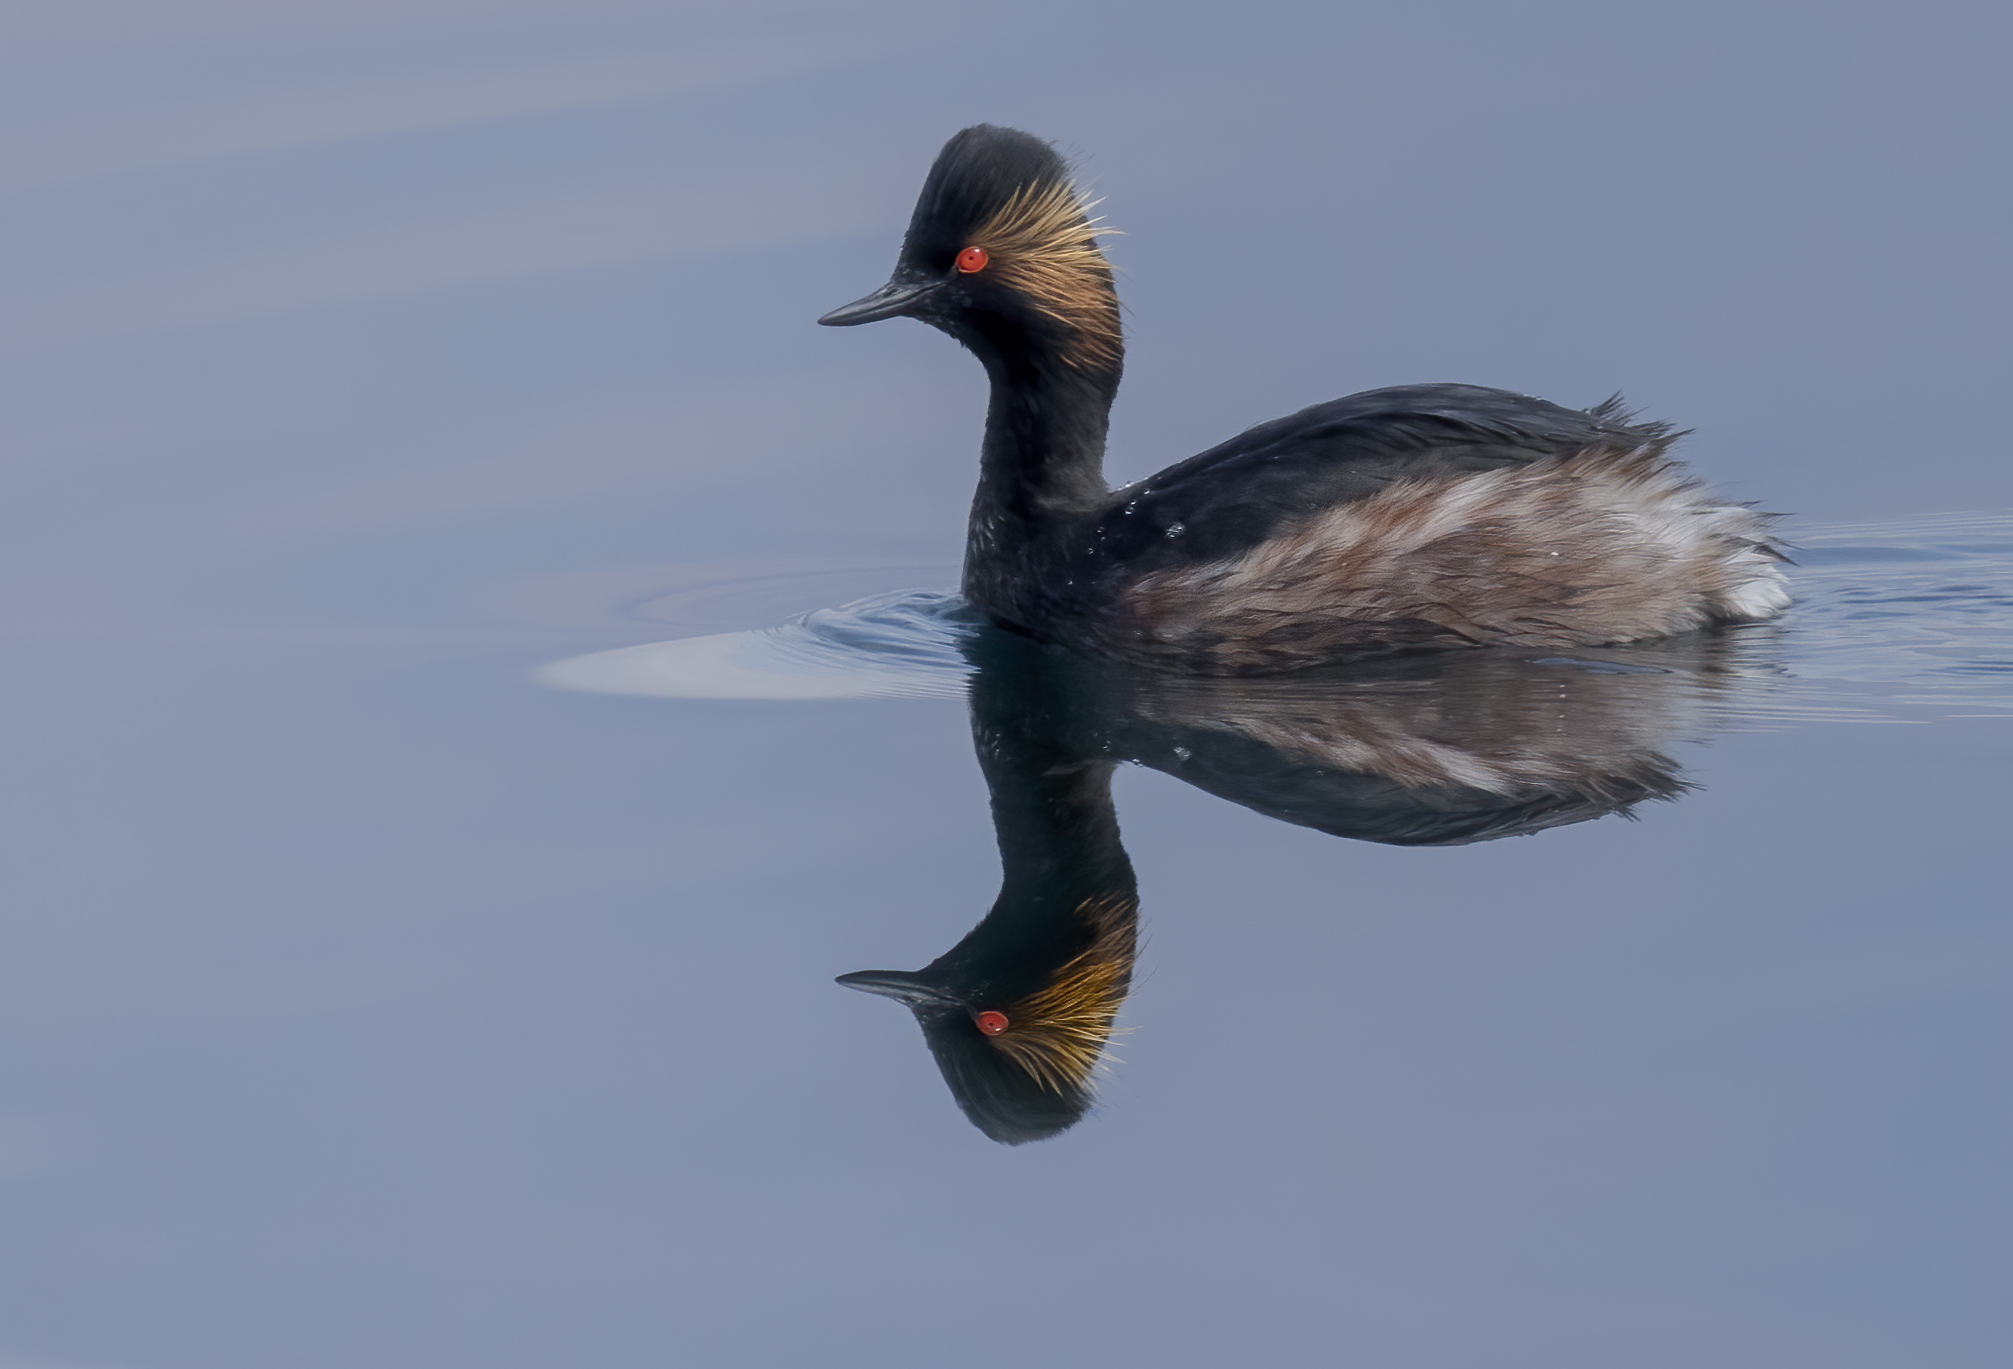 in the mirror, small grebe in livery...